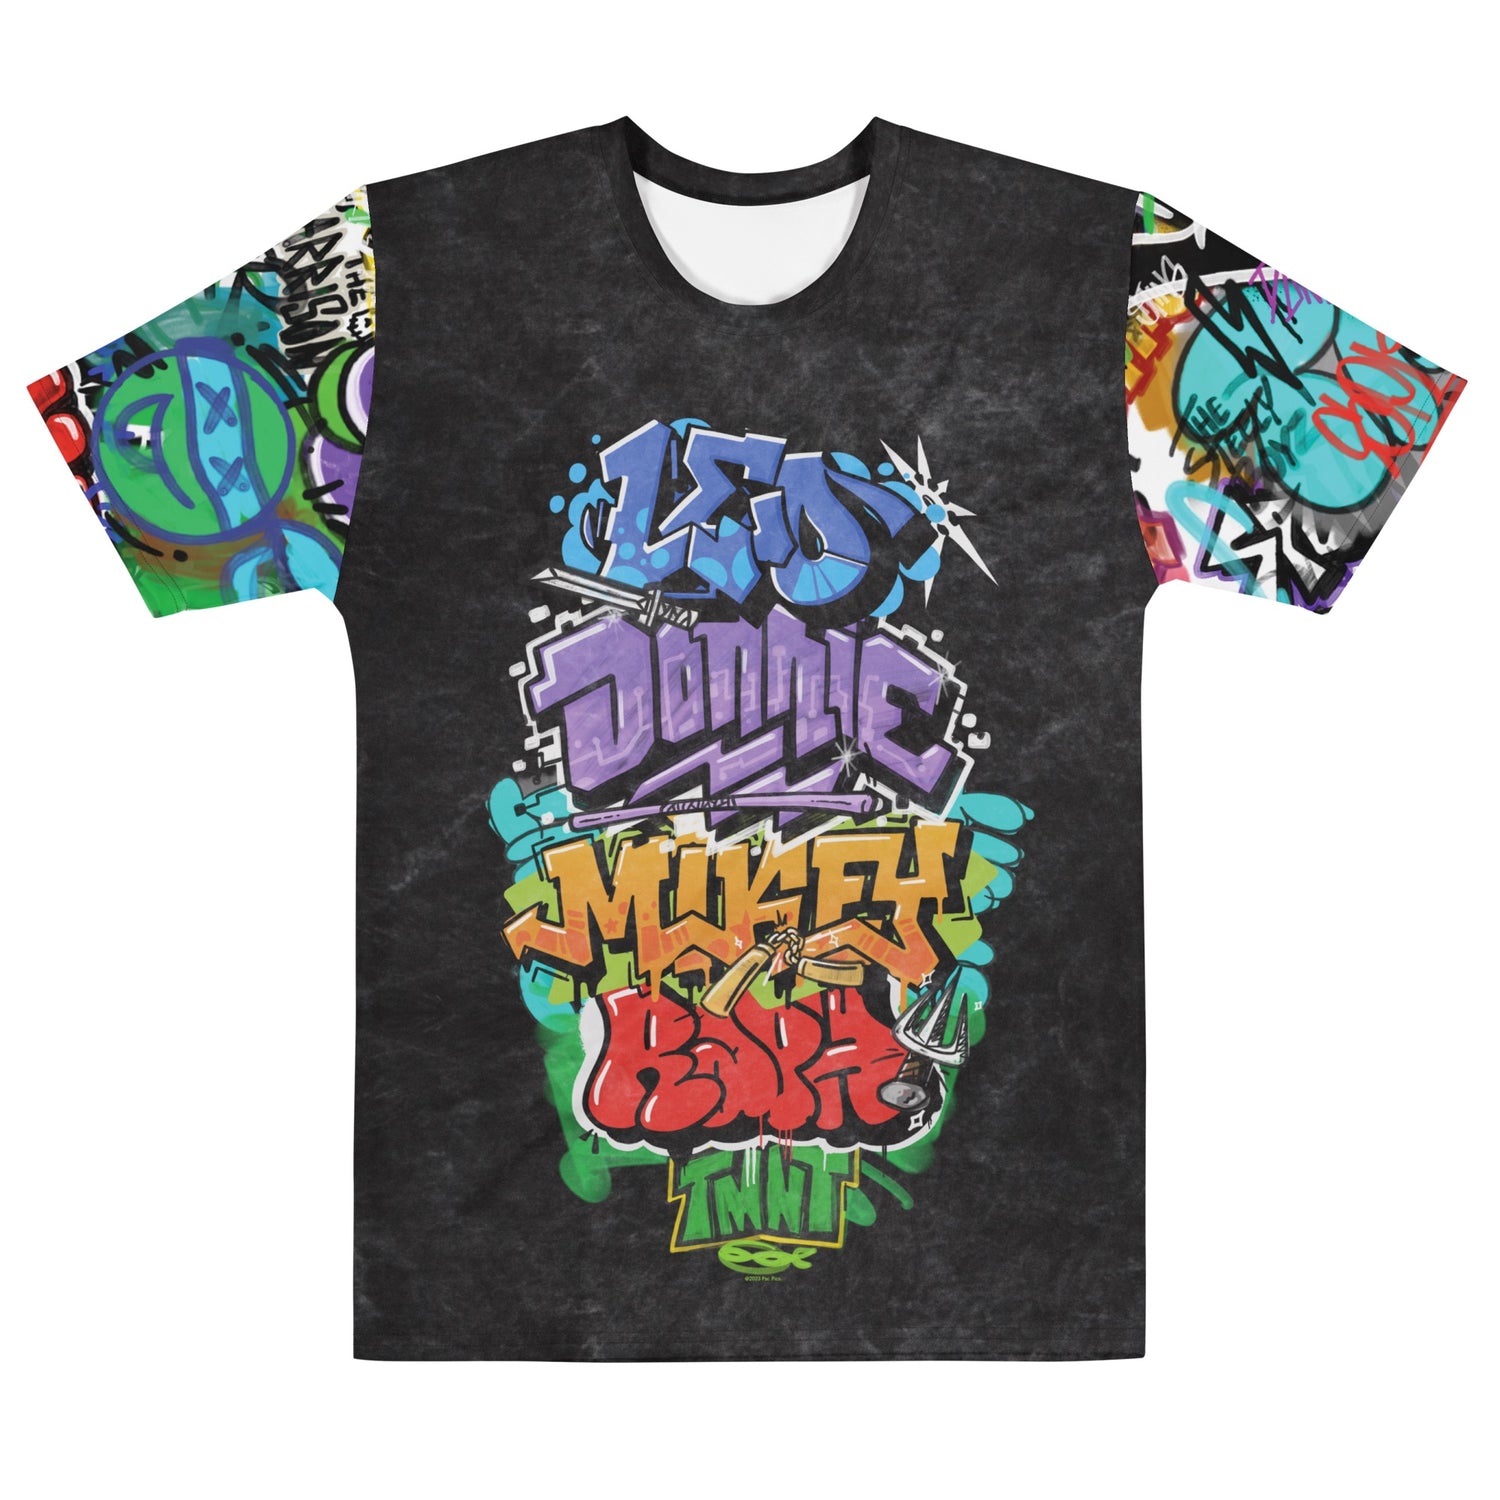 Have you guys seen this shirt yet? : r/TMNT